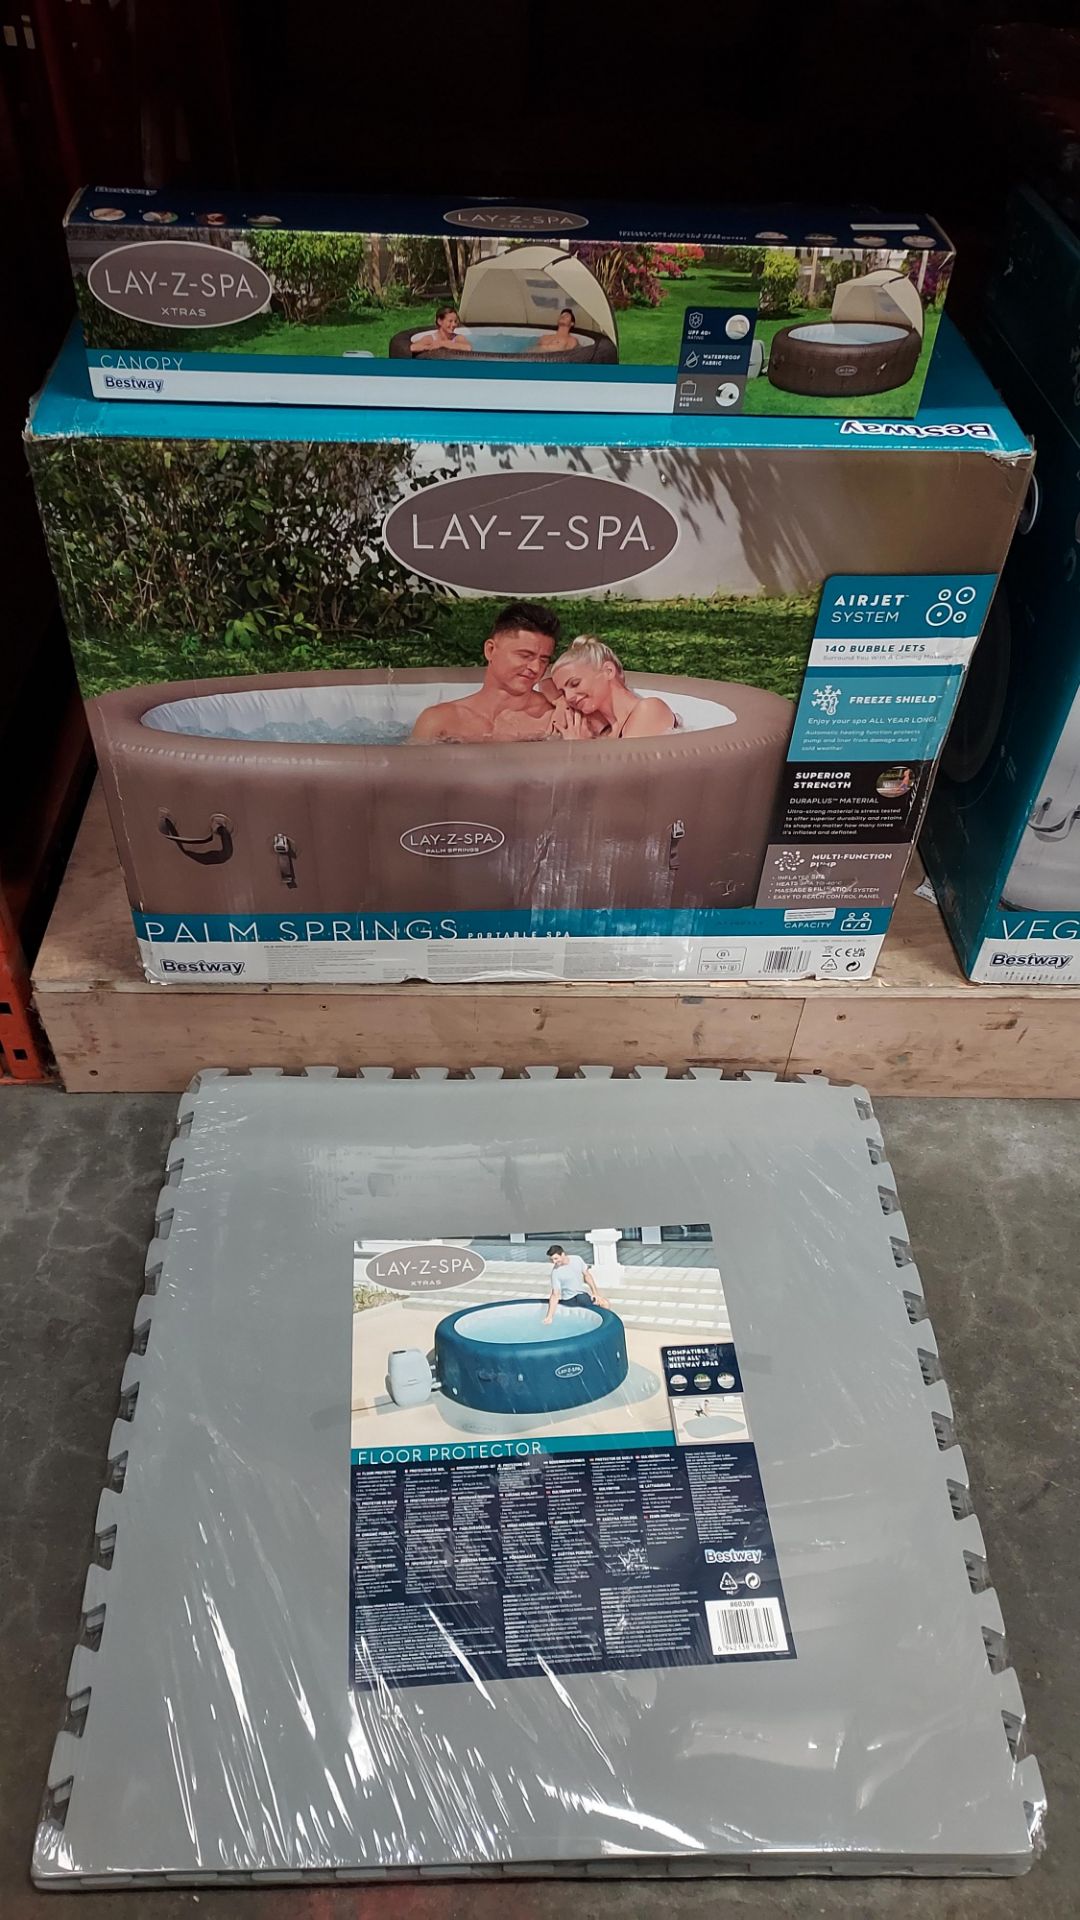 1 X BRAND NEW LAY-Z-SPA PALM SPRINGS PORTABLE SPA - AIR JET SYSTEM - WITH DIGITAL CONTROL PANEL -140 - Image 5 of 5